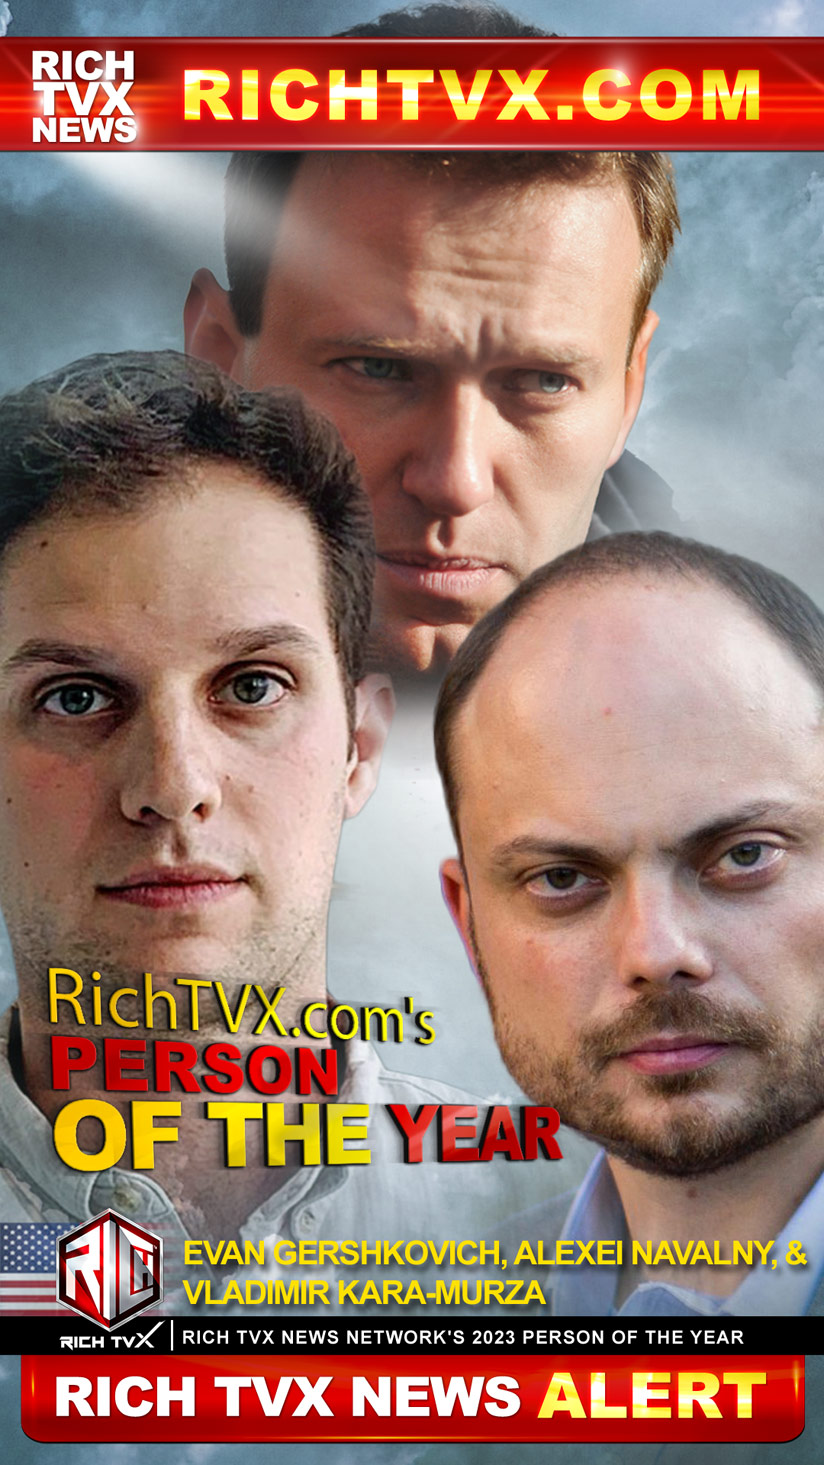 Evan Gershkovich, Alexei Navalny, and Vladimir Kara-Murza Jointly Honored as ‘Persons of the Year’ for 2023 by Rich TVX News Network